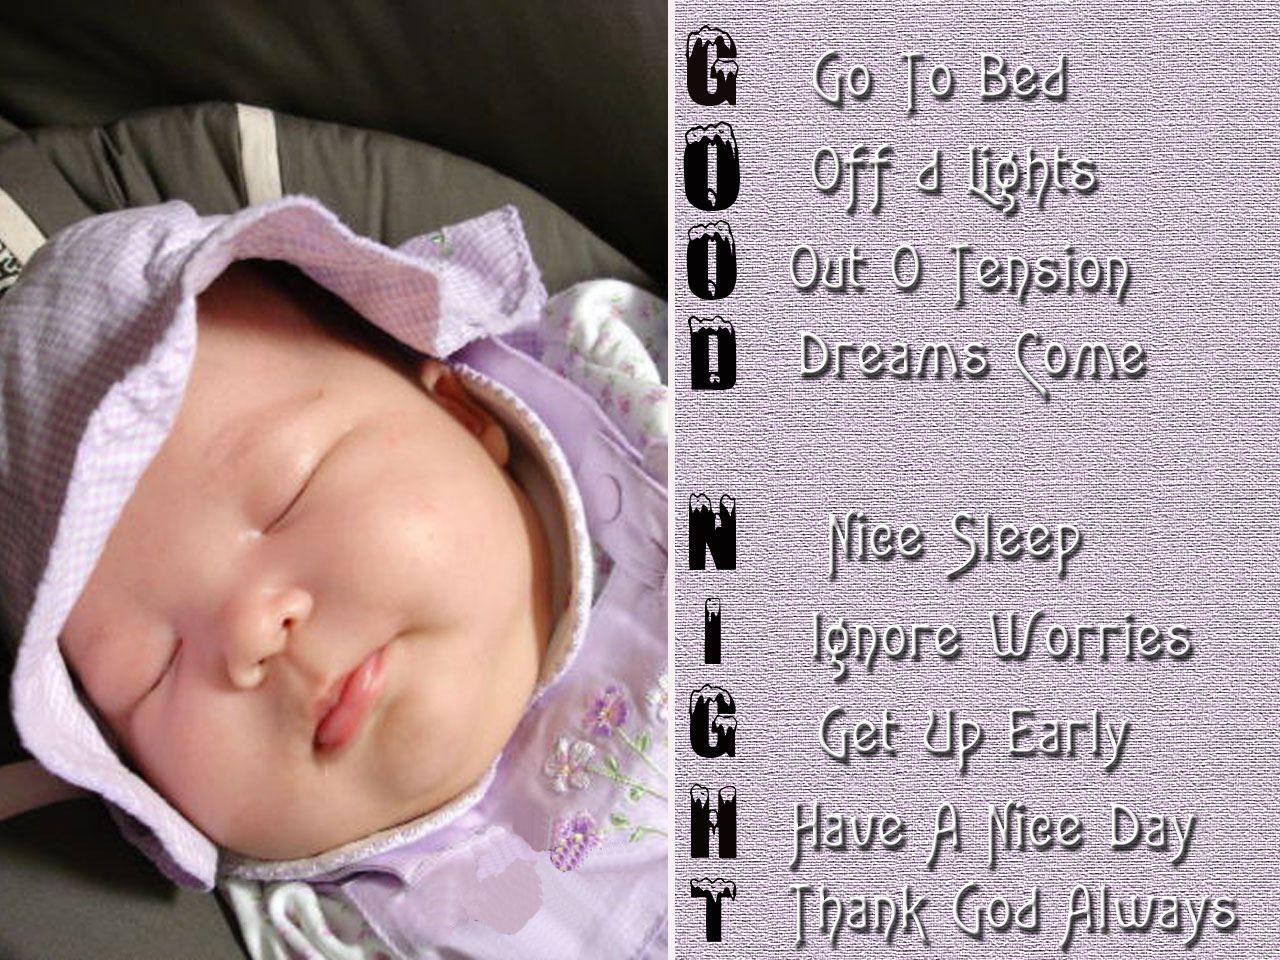 Good Night Baby Wallpapers - Wallpaper Cave